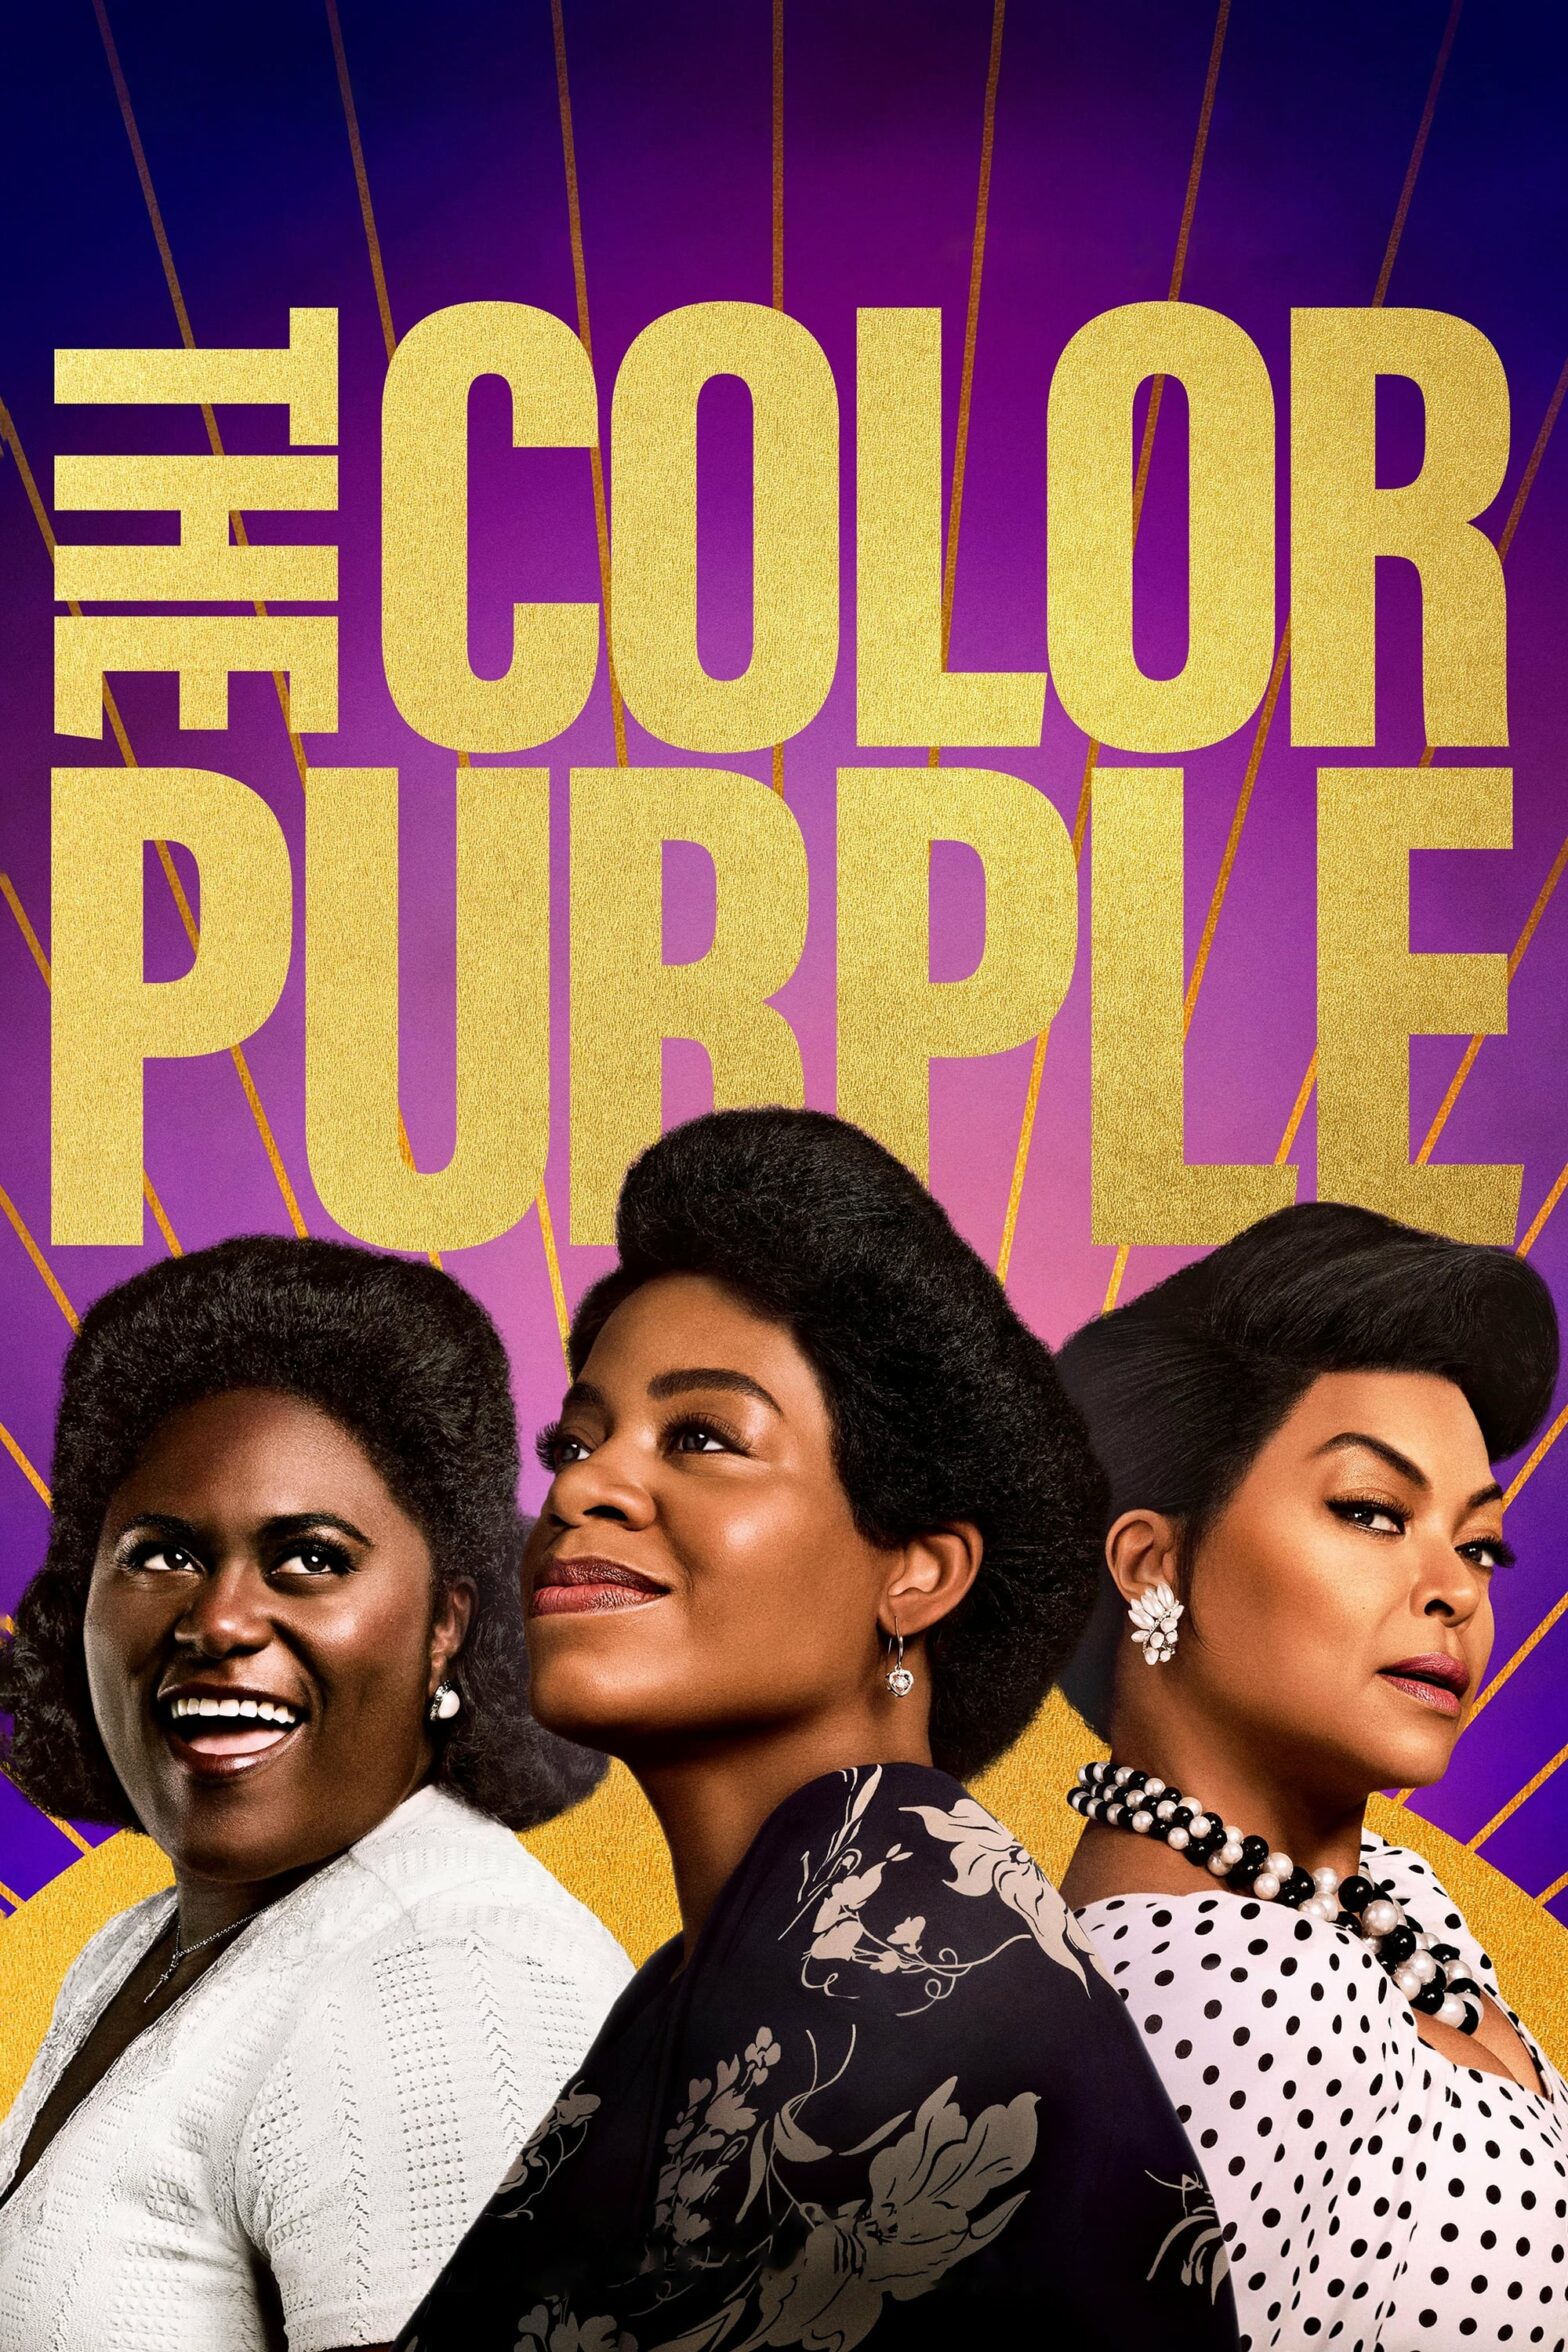 Poster for the movie "The Color Purple"